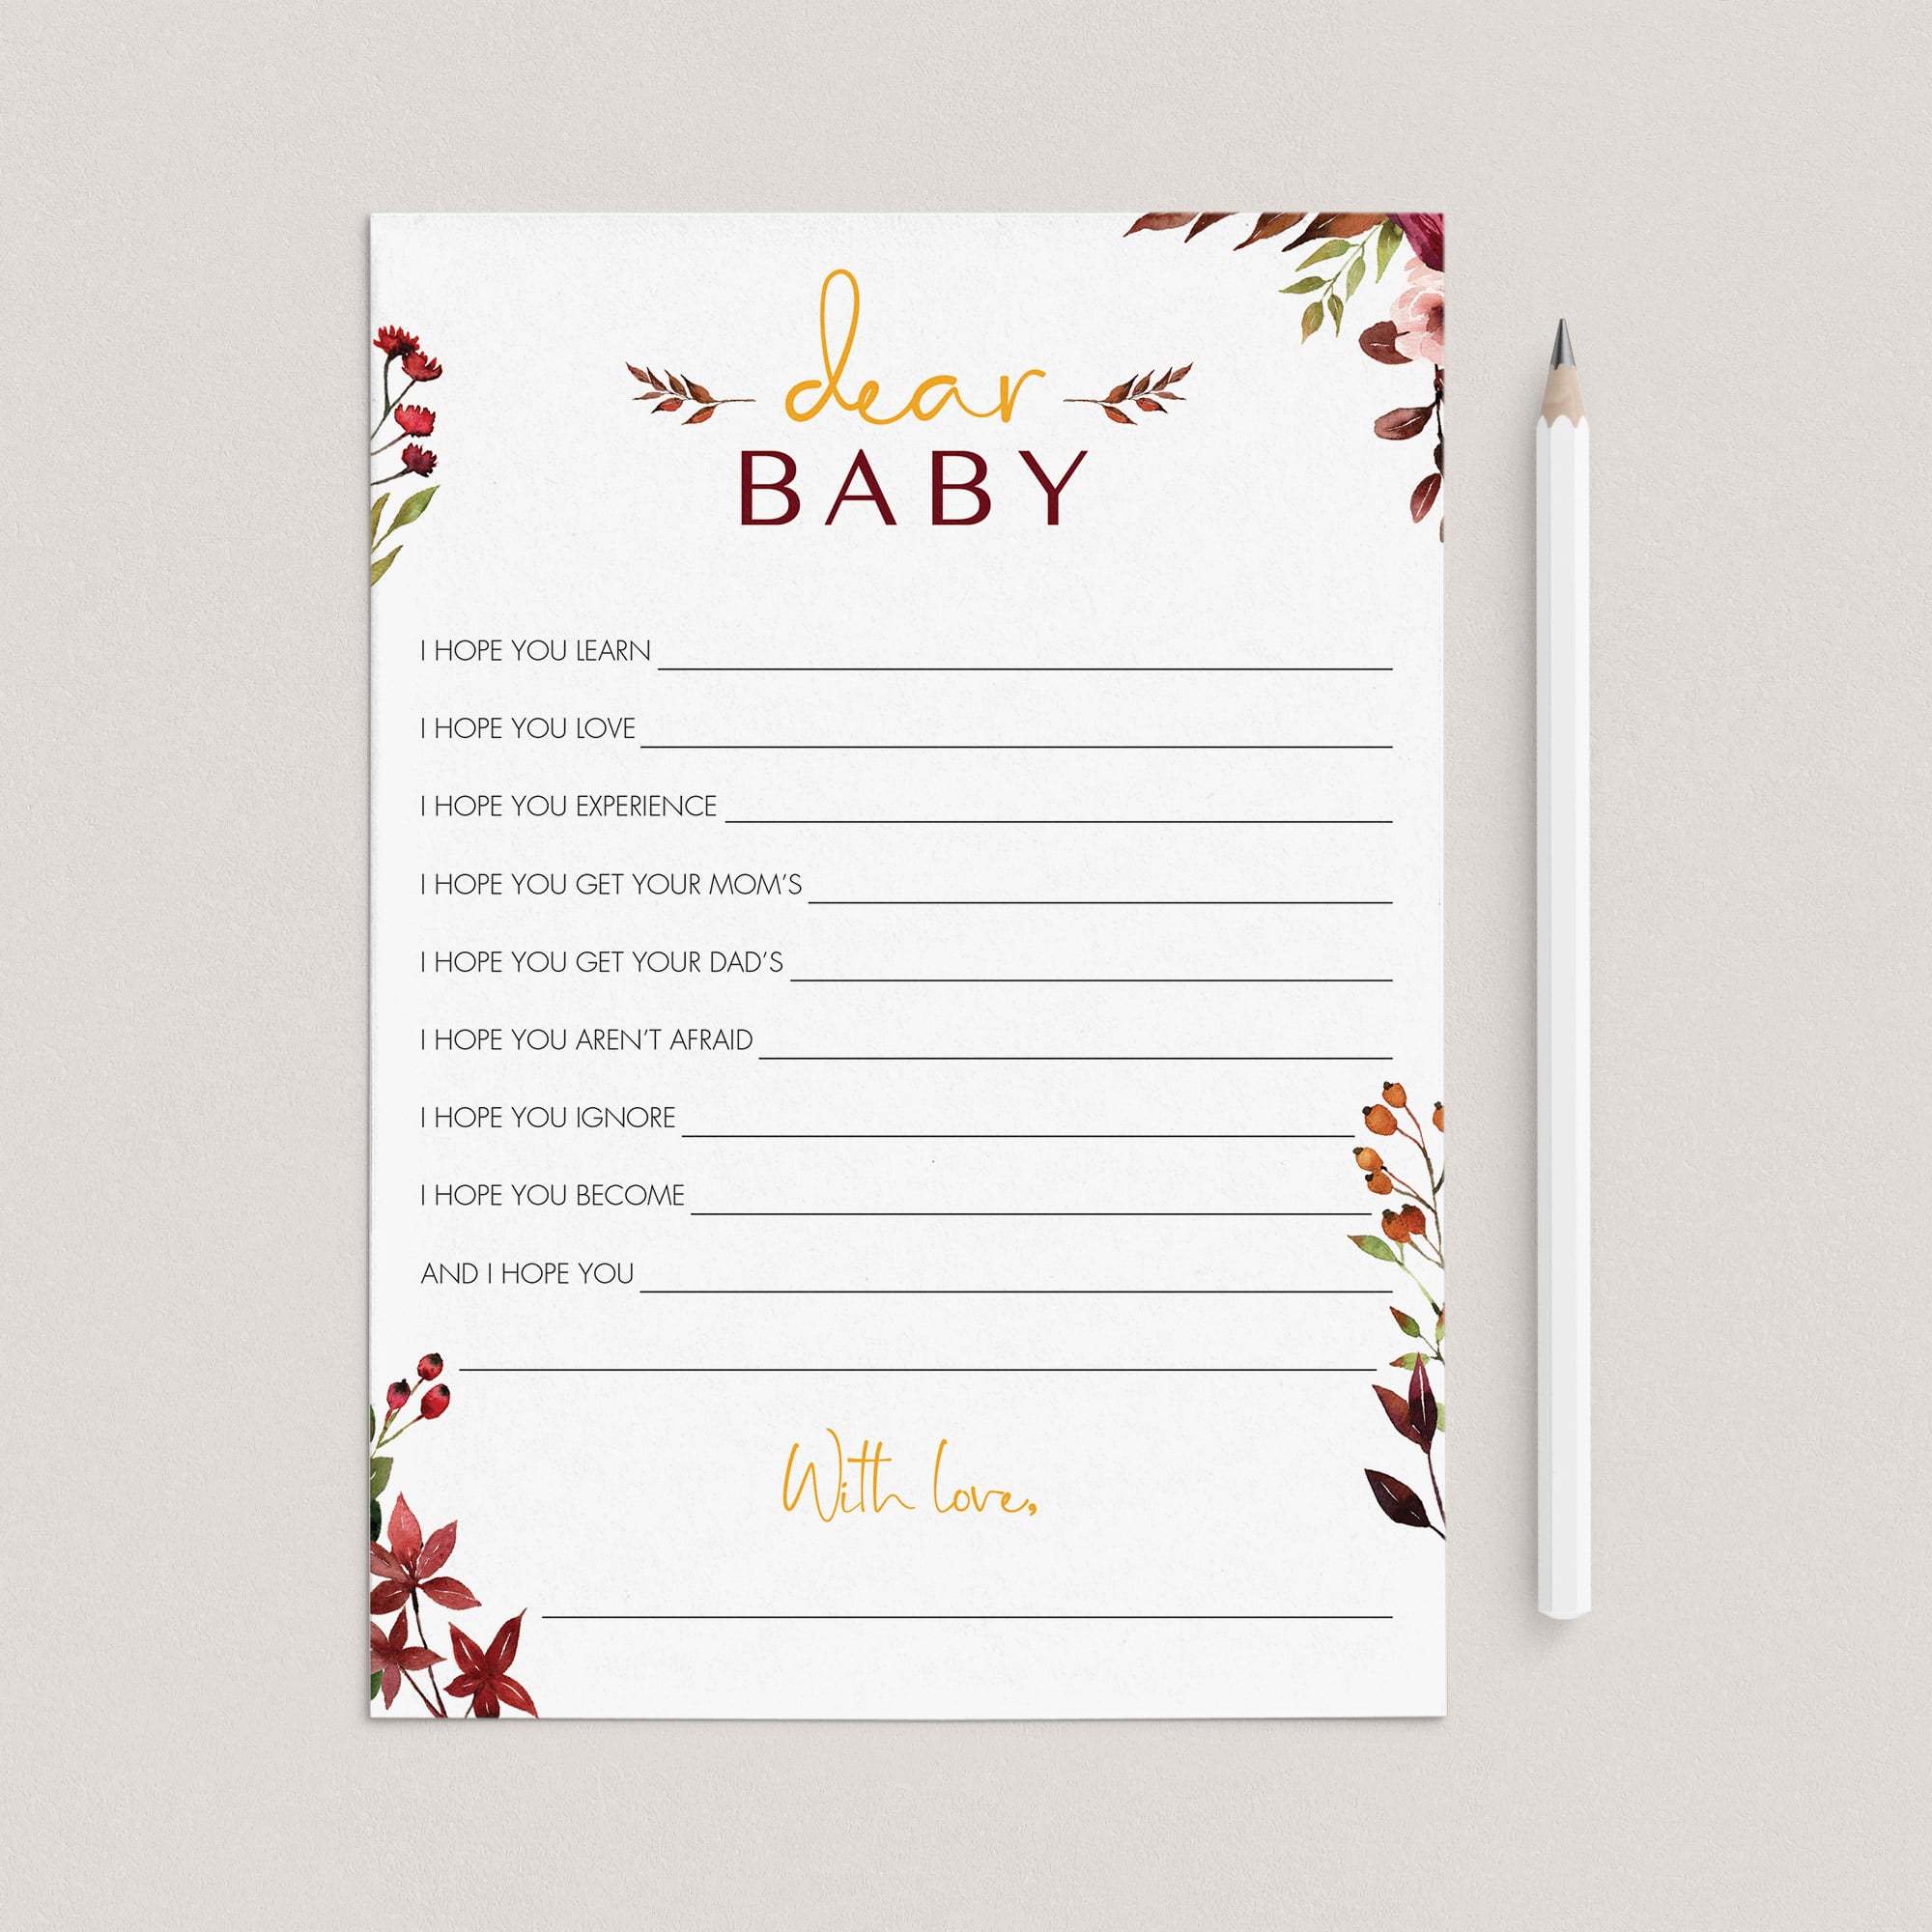 Wishes for baby shower cards fall theme by LittleSizzle